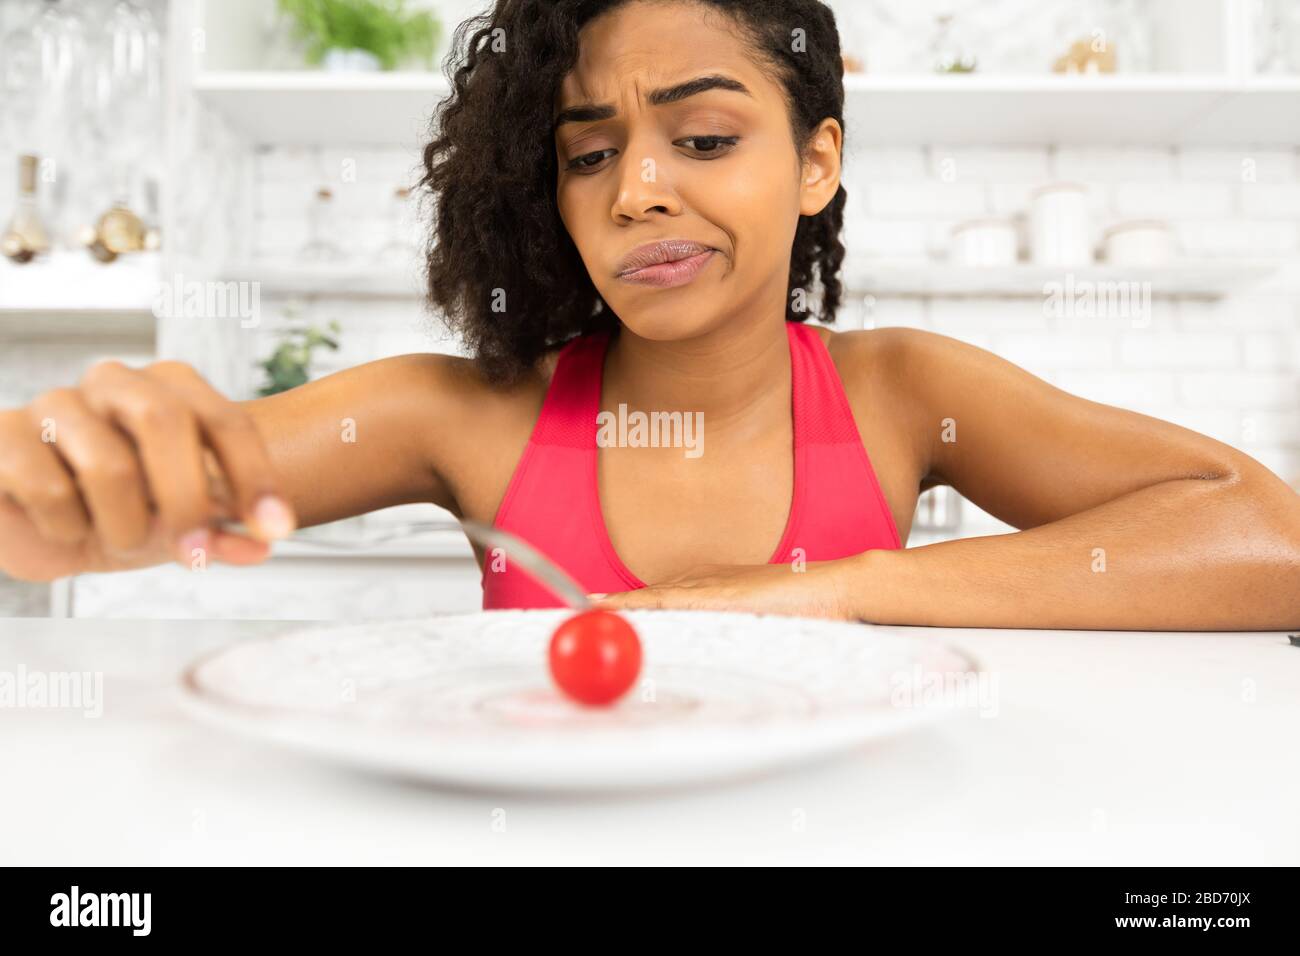 Depressed afro lady looking at tiny tomato on a plate Stock Photo